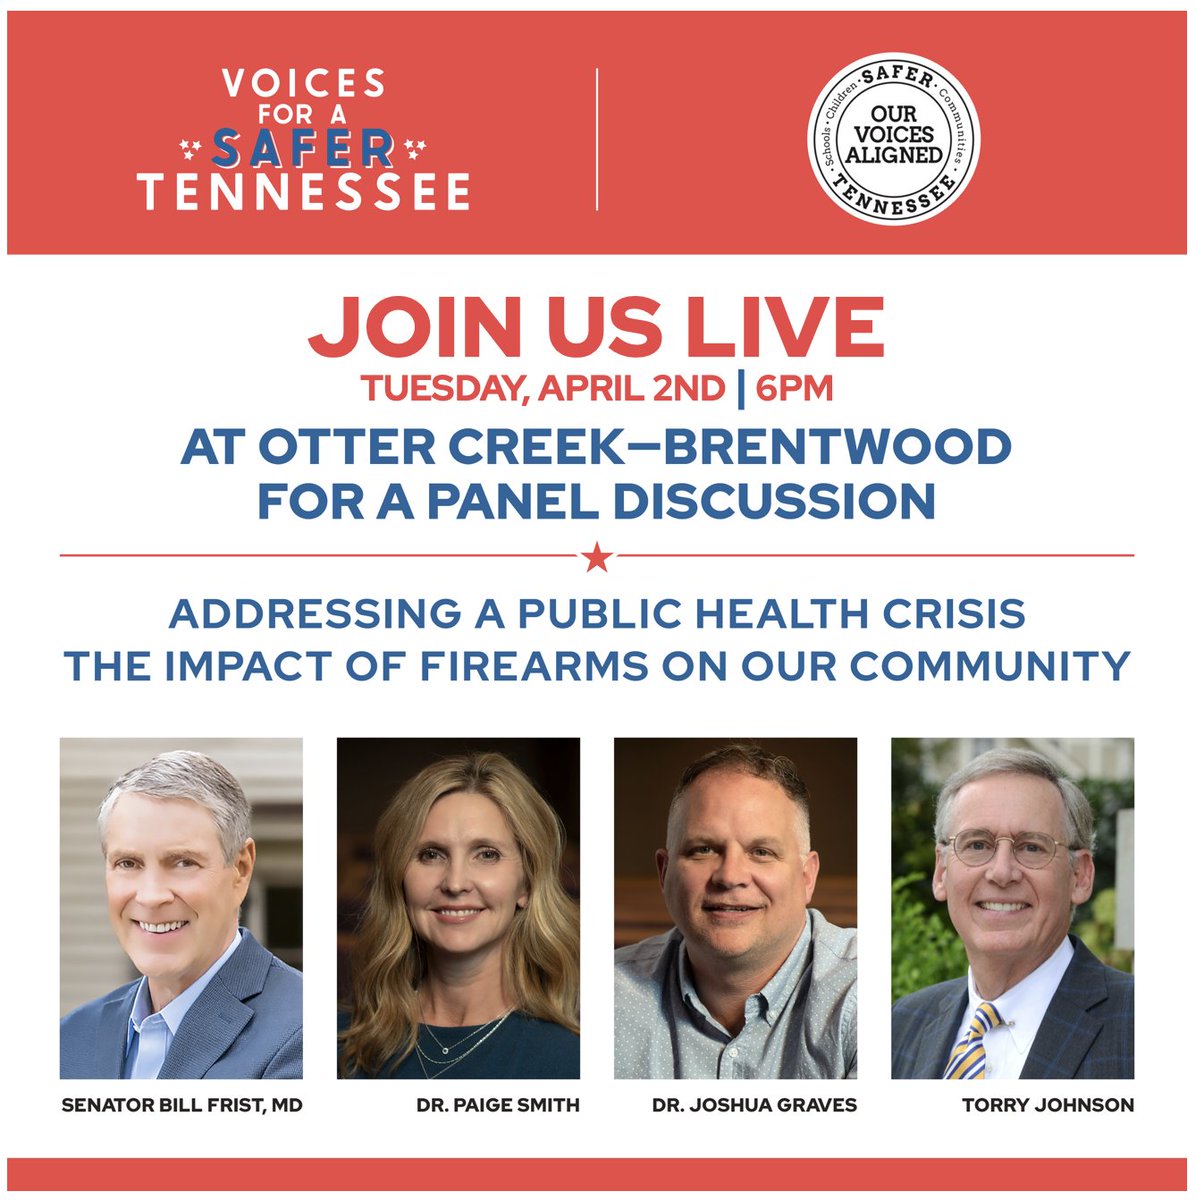 Join us in person or via Livestream Link at Otter Creek Church in Brentwood TOMORROW. LINK TO REGISTER: safertn.org/events/william… OR JOIN VIA LIVESTREAM: safertn.org/livestream/